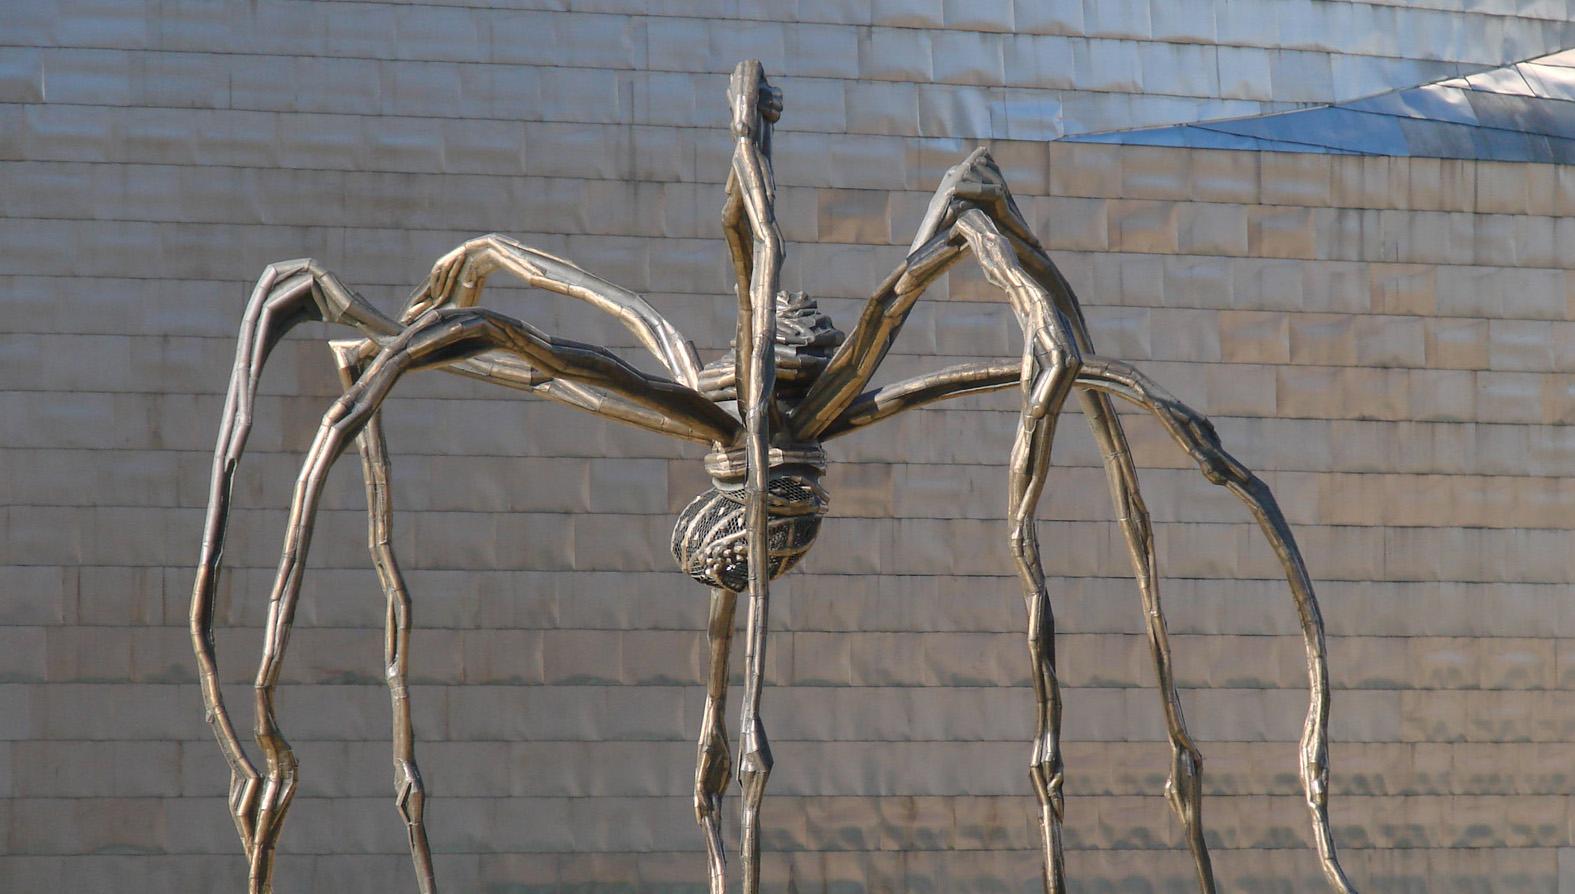 Early Works by Louise Bourgeois: Sculptures, Paintings, and Works